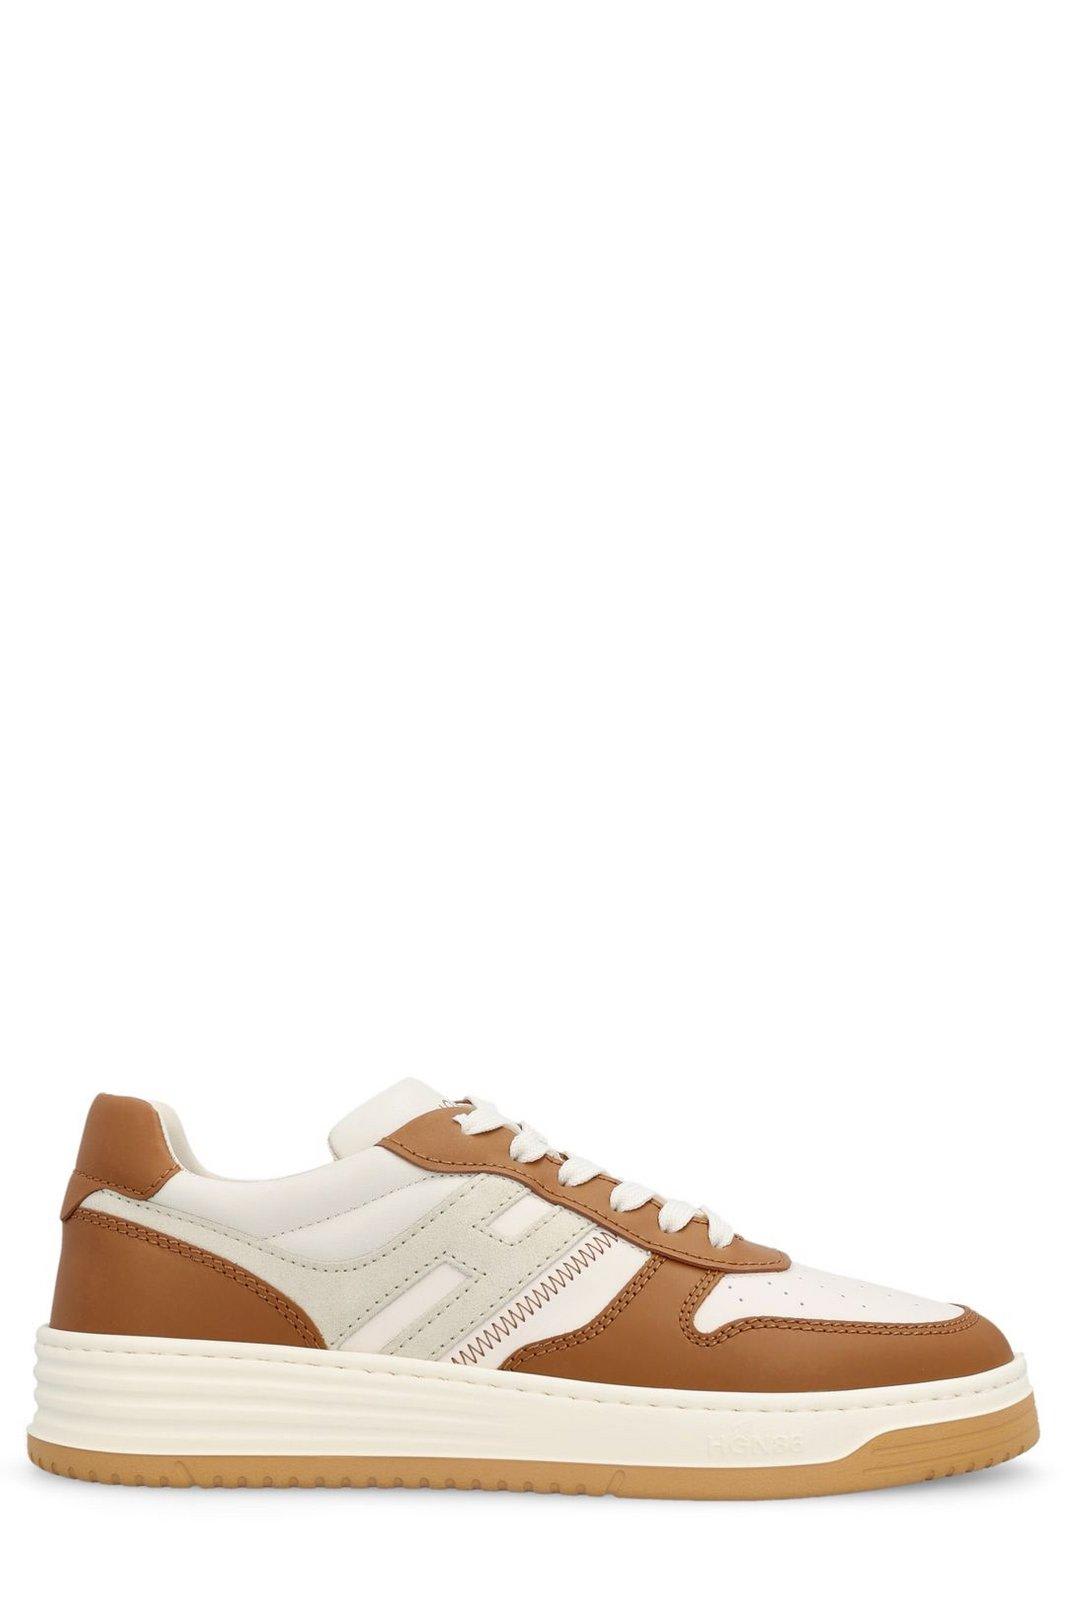 HOGAN PANELLED LACE-UP SNEAKERS